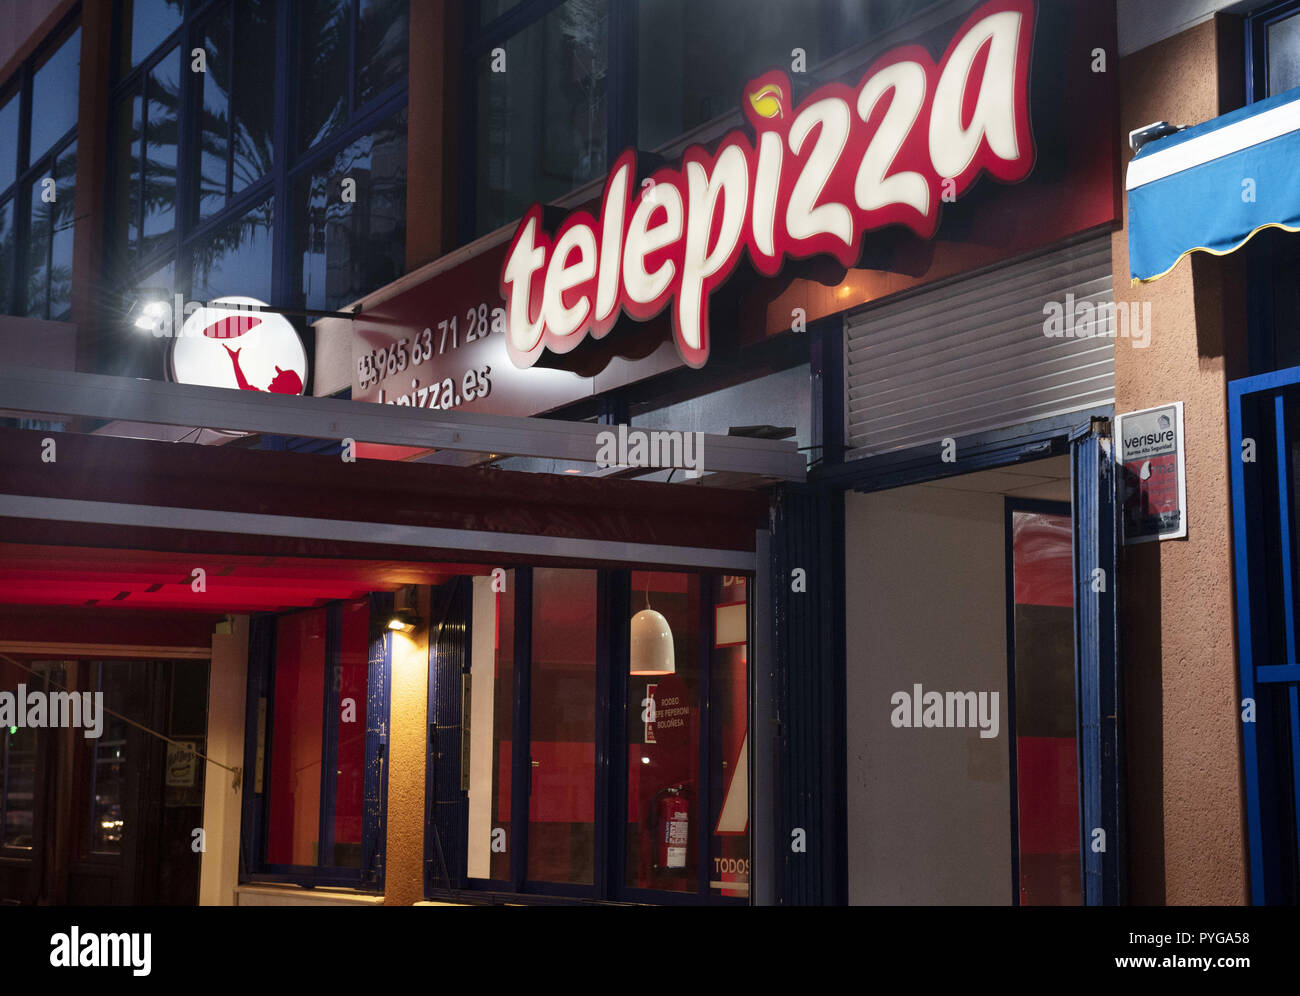 Alicante, Comunidad Valenciana, Spain. 26th Oct, 2018. Spanish fast-food restaurant branch of Telepizza seen in Spain. Credit: Miguel Candela/SOPA Images/ZUMA Wire/Alamy Live News Stock Photo